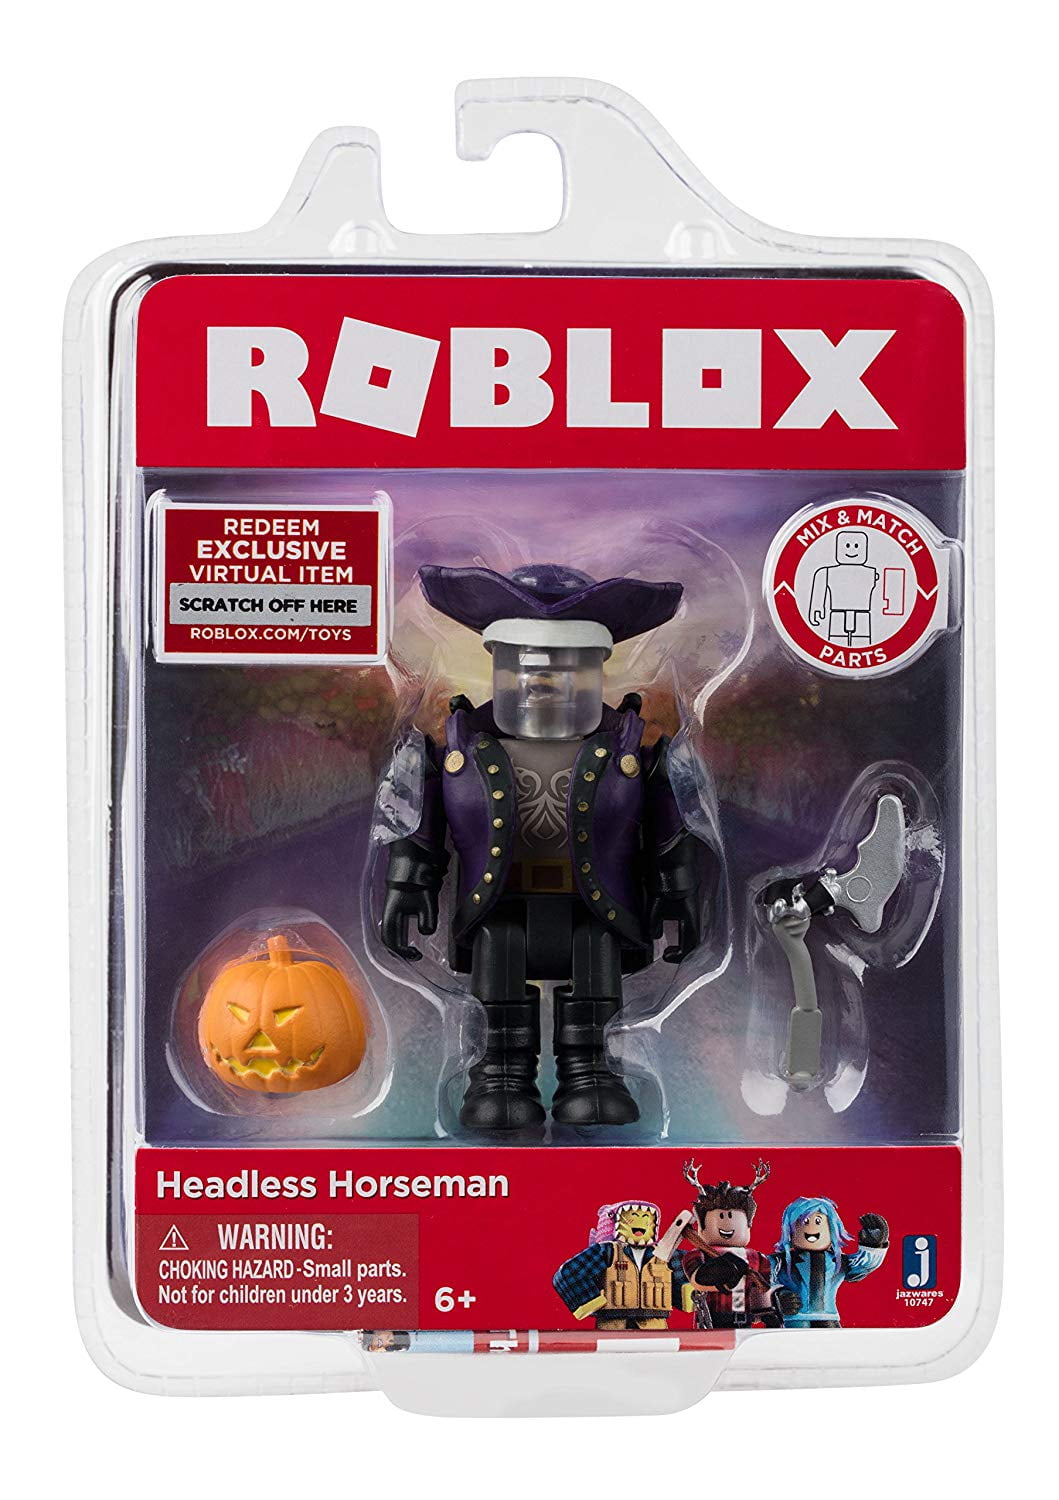 Headless Horseman Figure With Exclusive Virtual Item Game Code Roblox Headless Horseman Figure Packwalmartes With One Figure Accessories And Collector S Checklist By Roblox Walmart Com Walmart Com - headless head roblox file